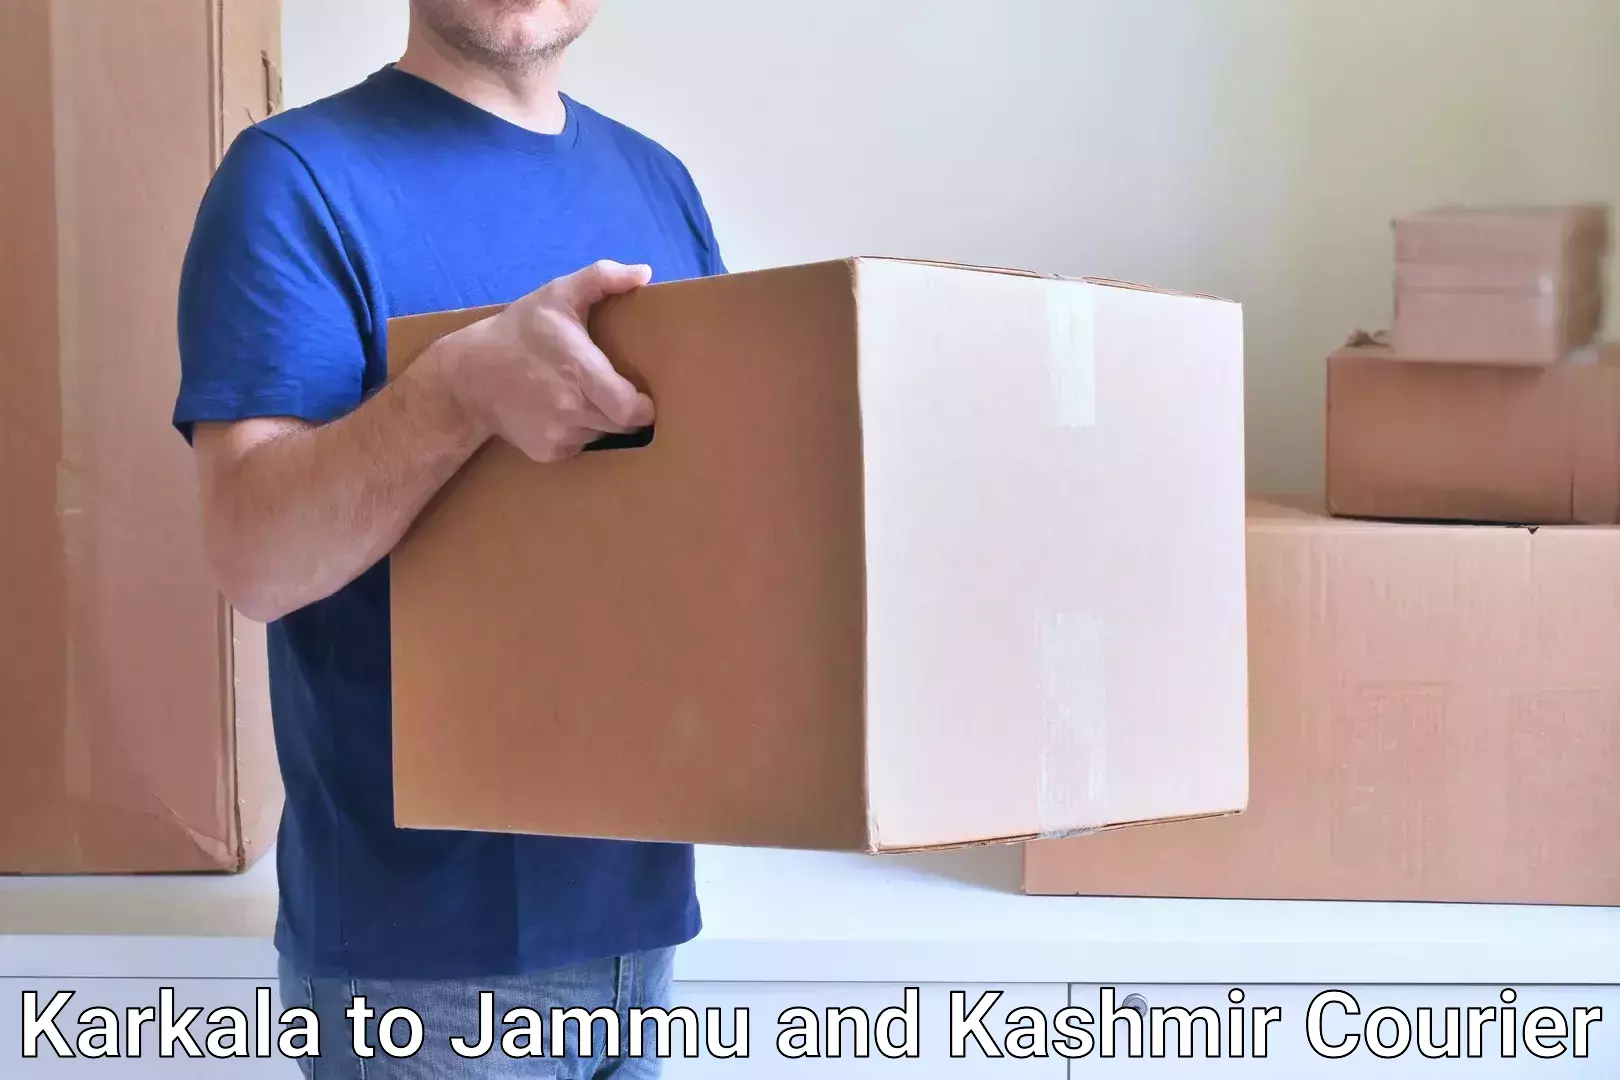 Efficient courier operations in Karkala to Baramulla